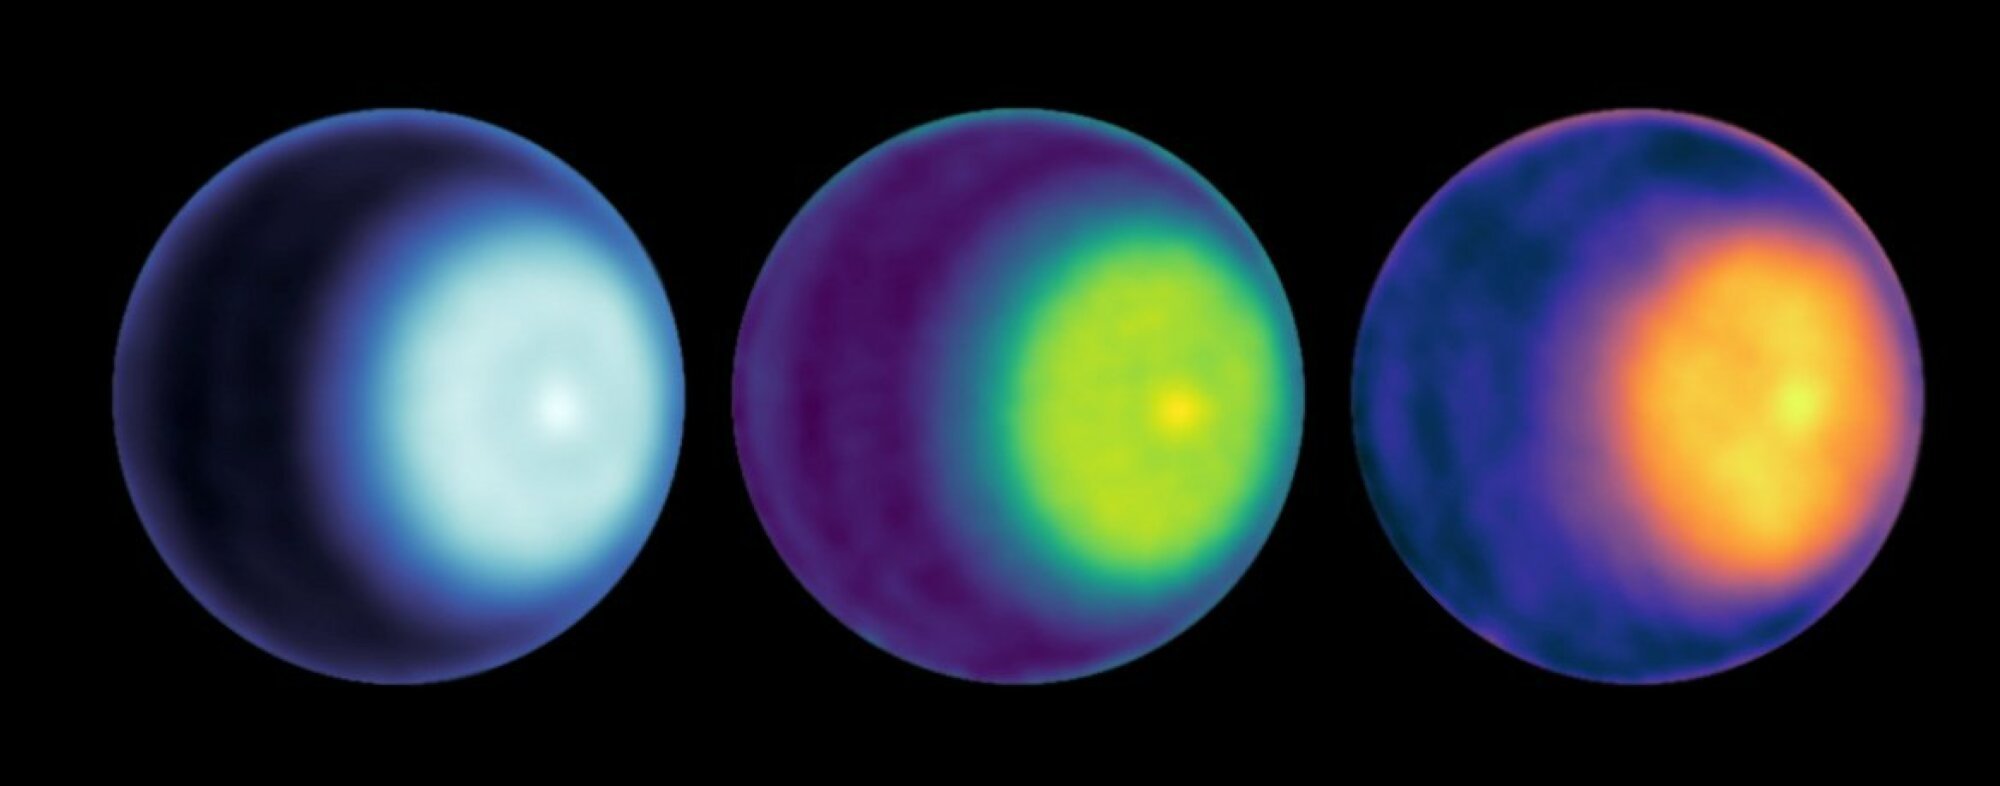 The cyclone atop Uranus seen in different light wavelengths. The cyclone is the lighter blue color at the right-center in each image.